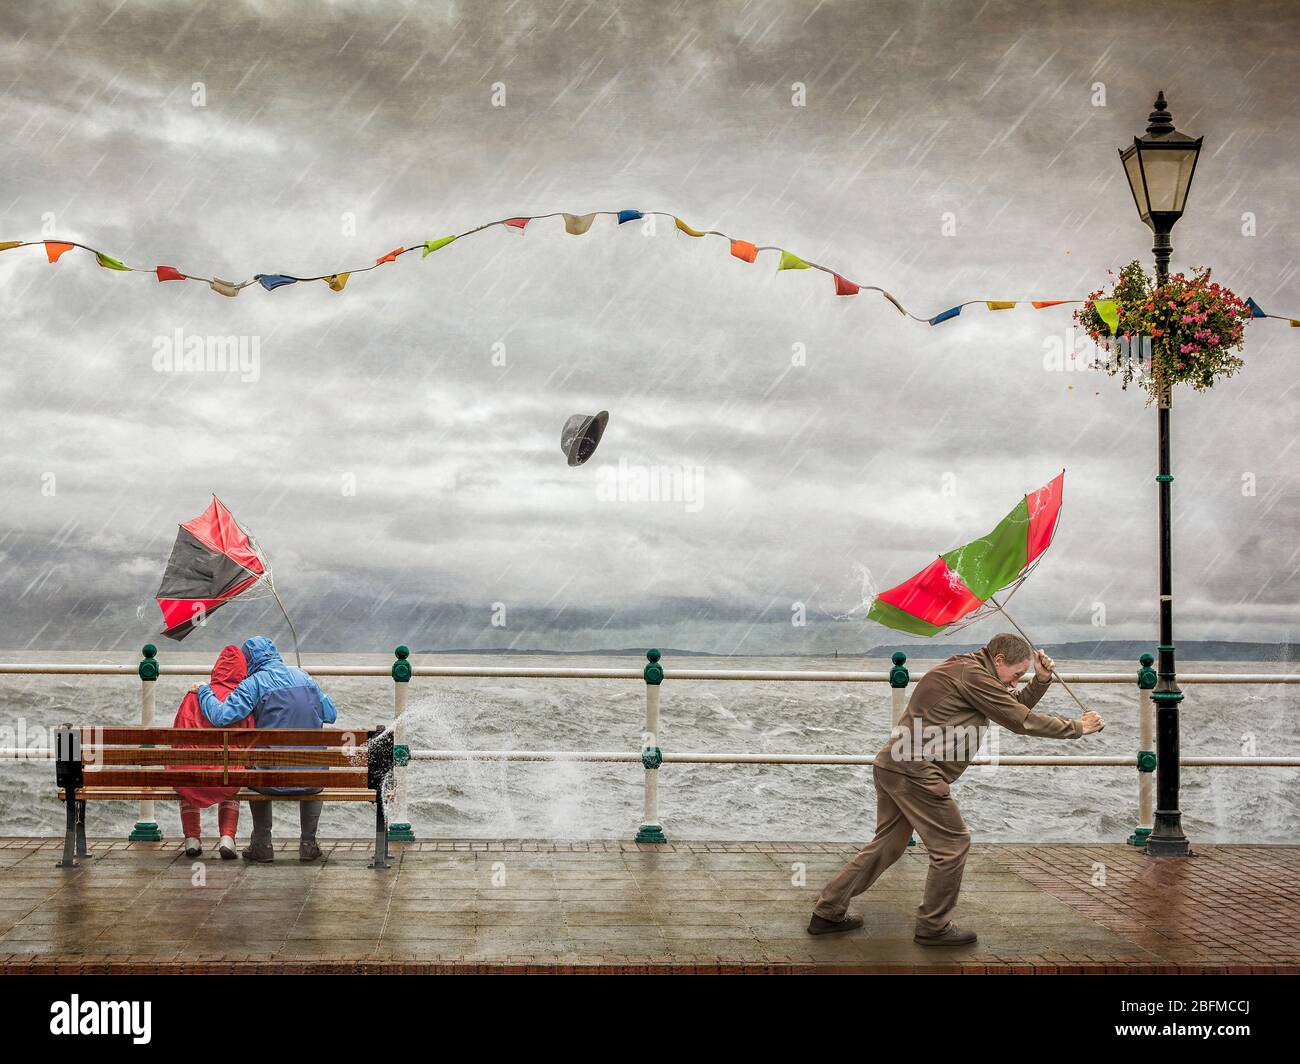 Not a good day for umbrellas. Extreme weather with humour. Stock Photo